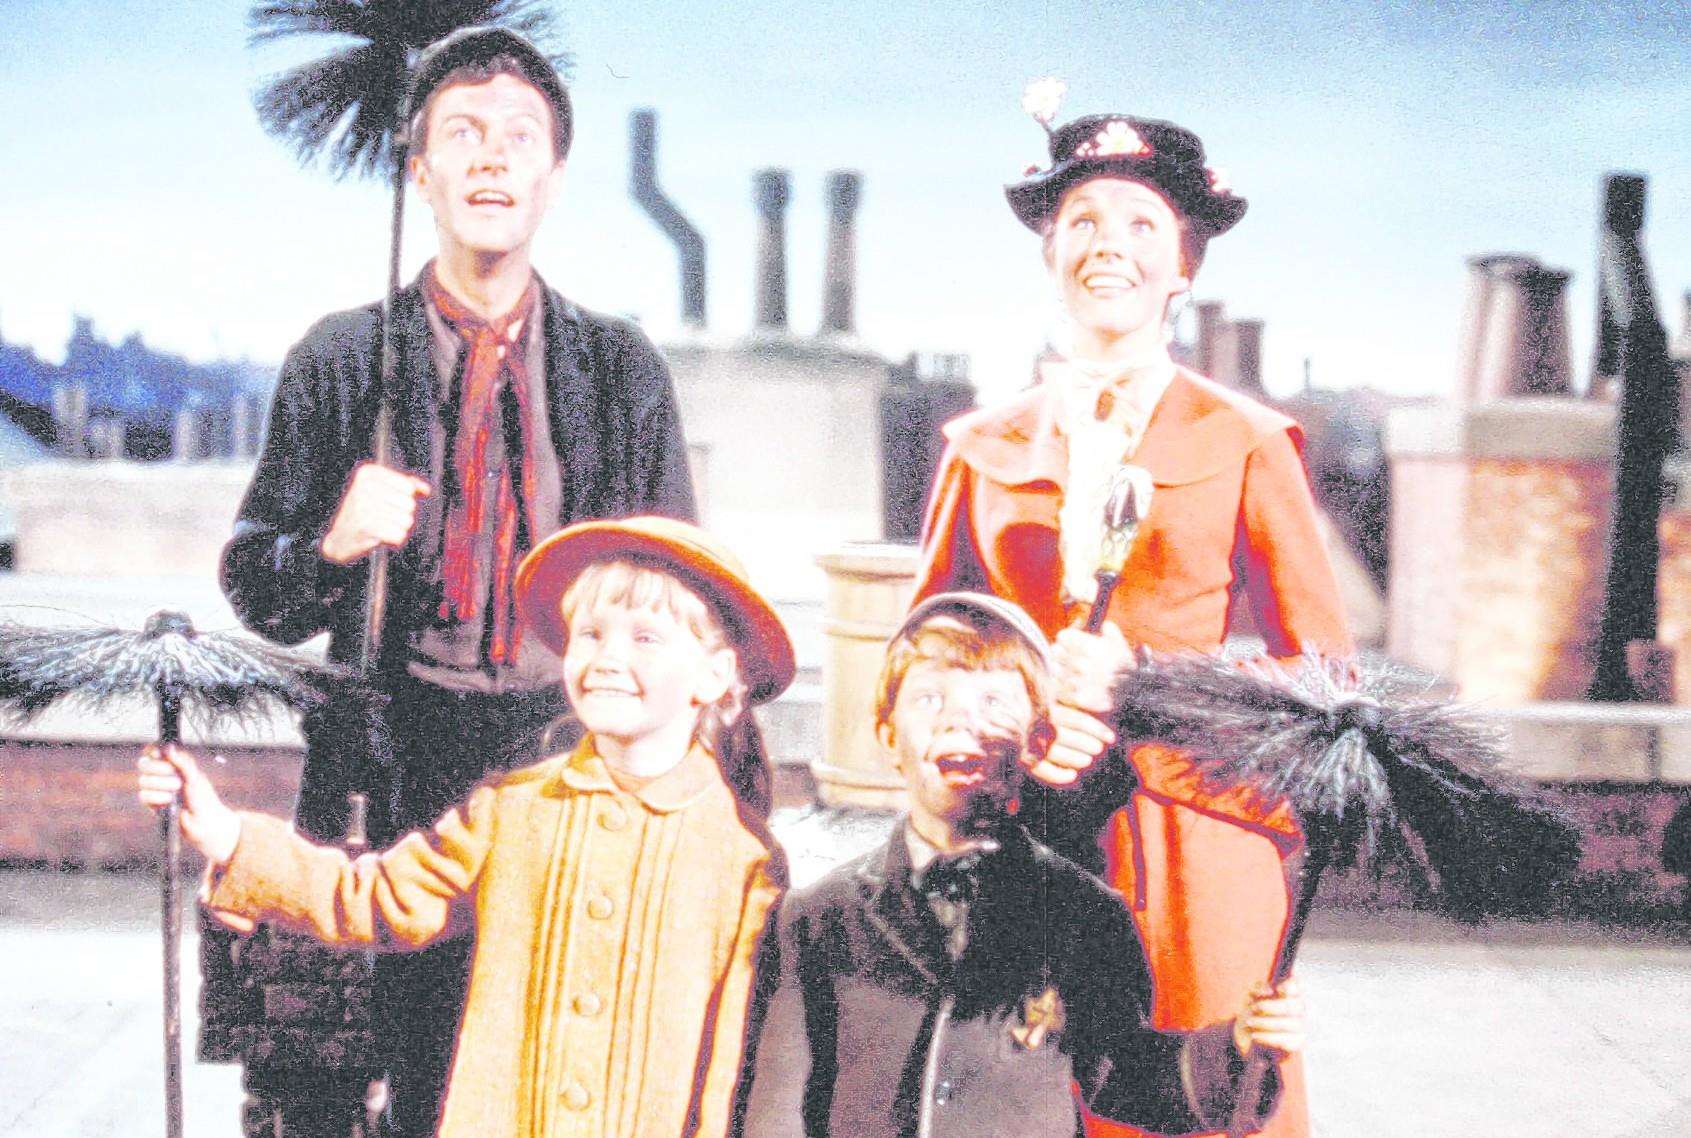 Mary Poppins starring Julie Andrews is being shown on BBC One on Christmas Eve